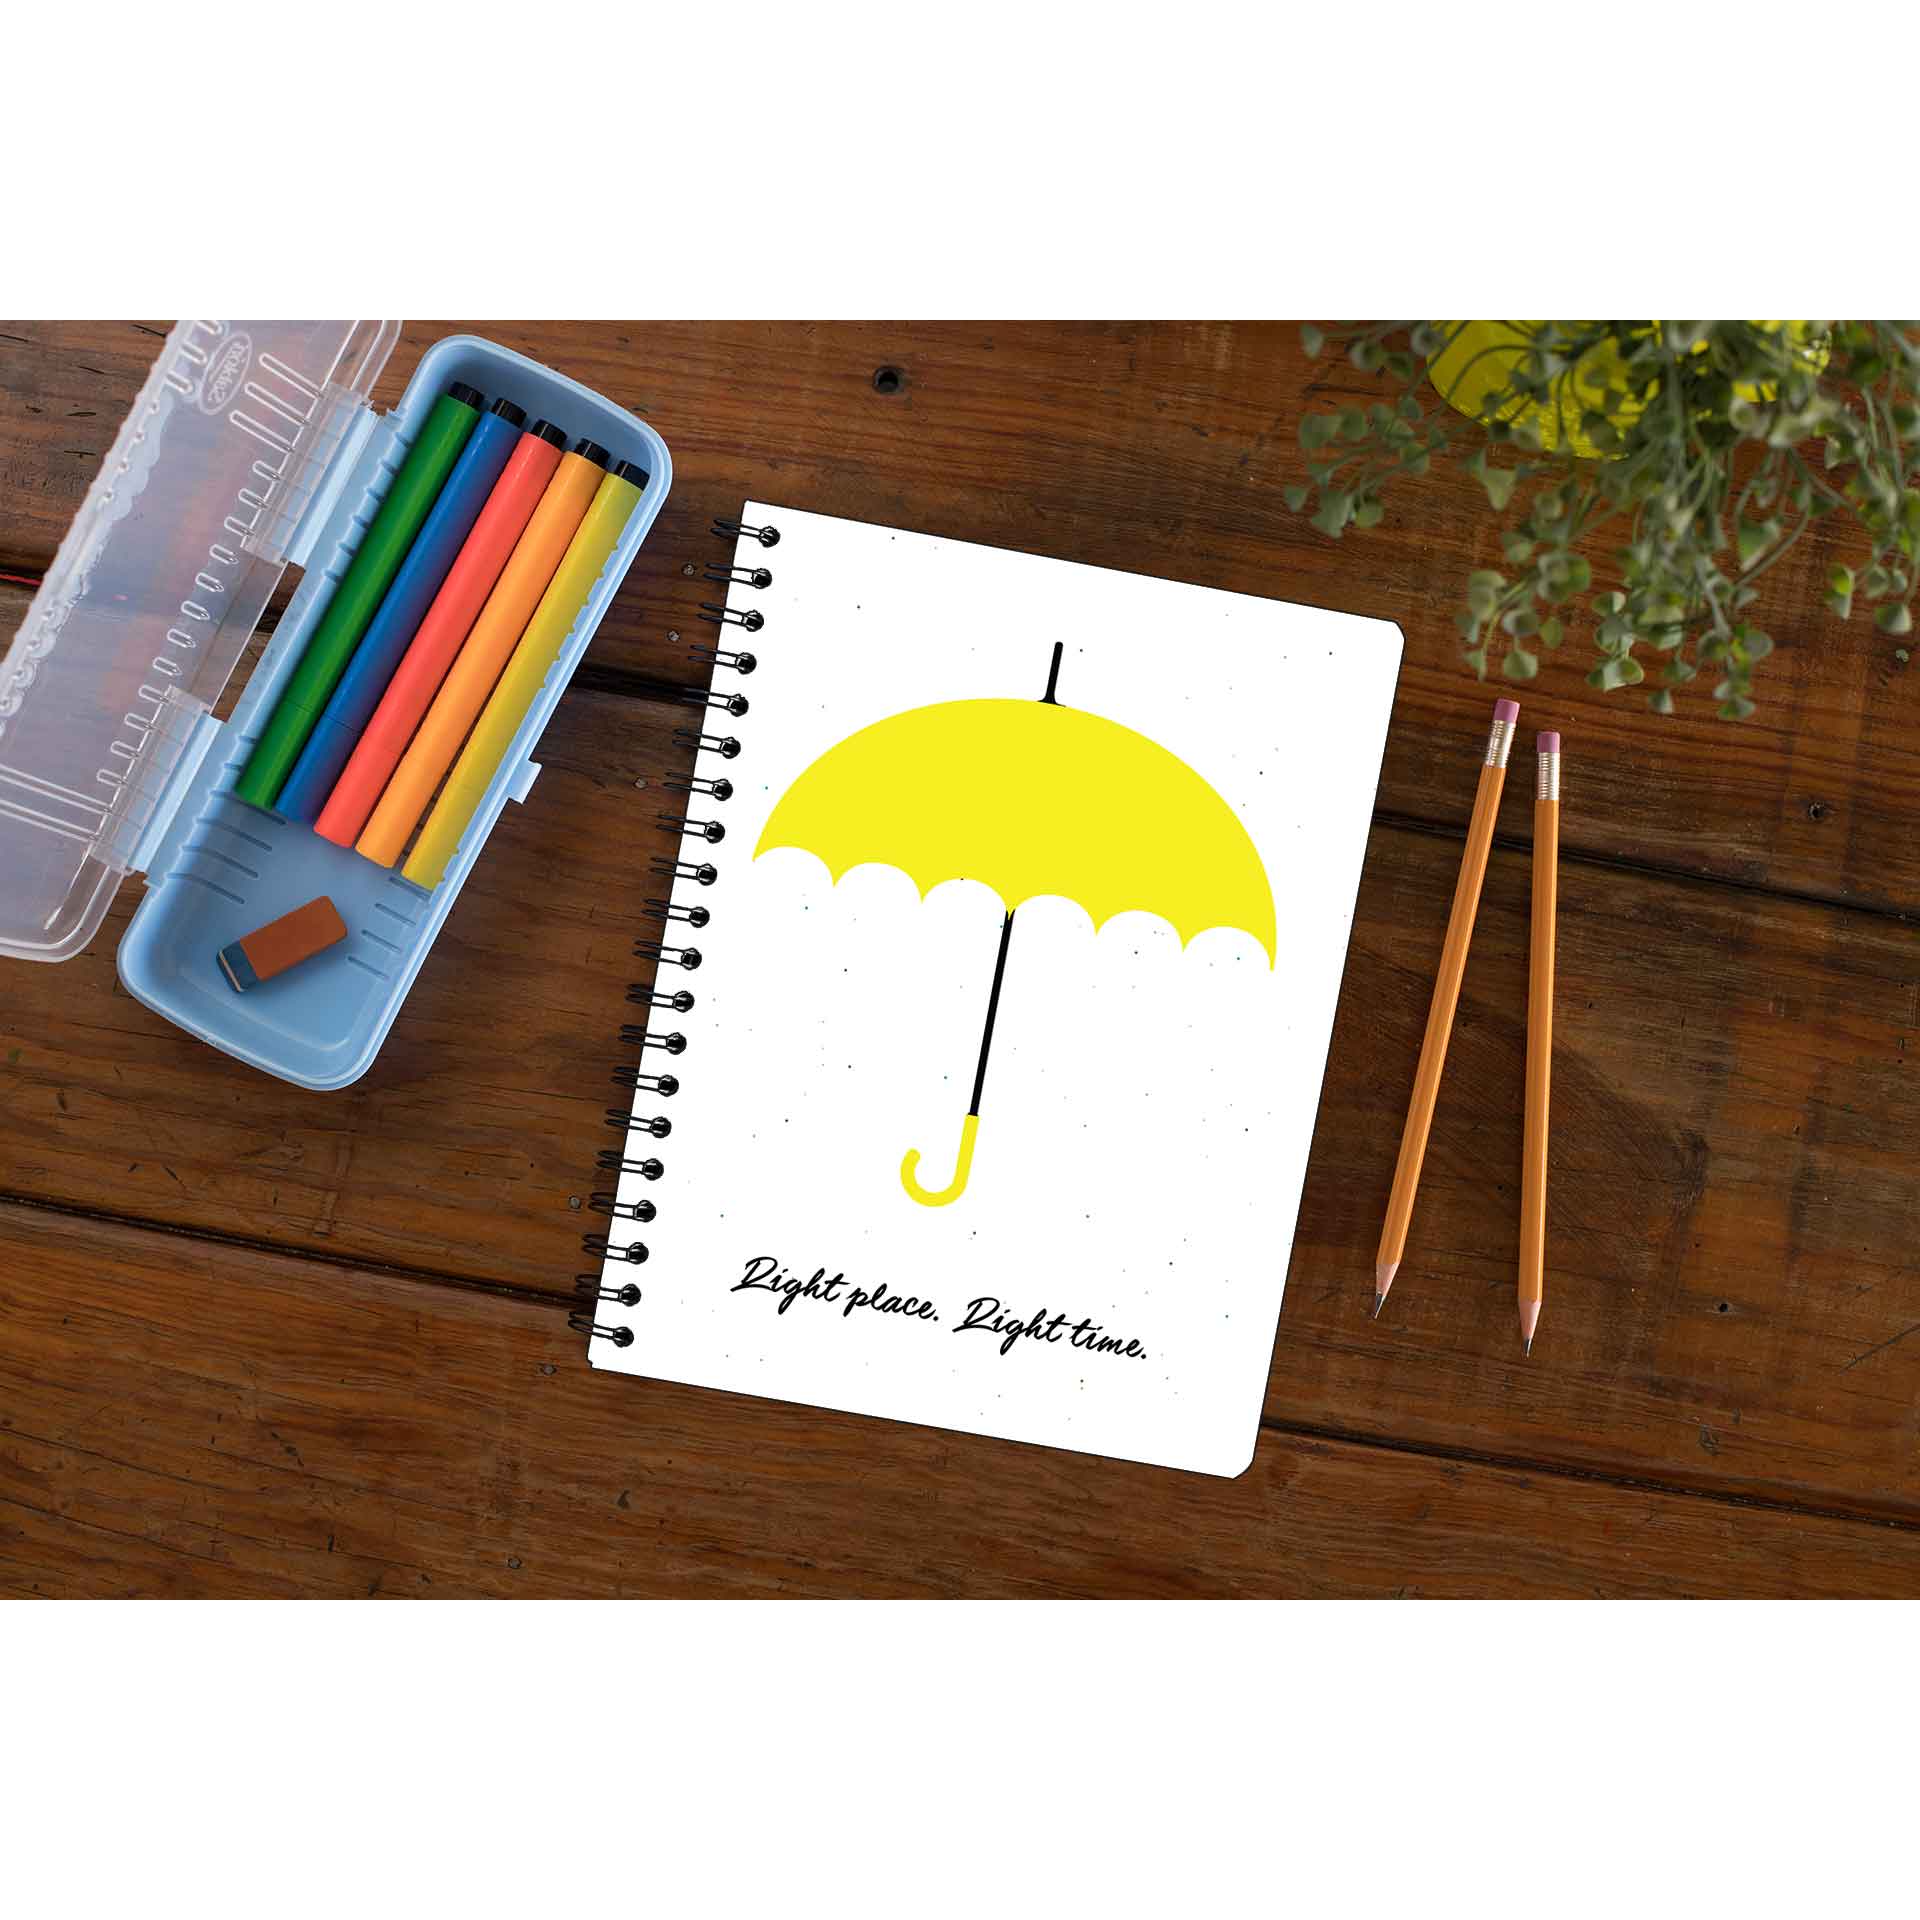 How I Met Your Mother Notebook - Right Place Right Time The Banyan Tee TBT